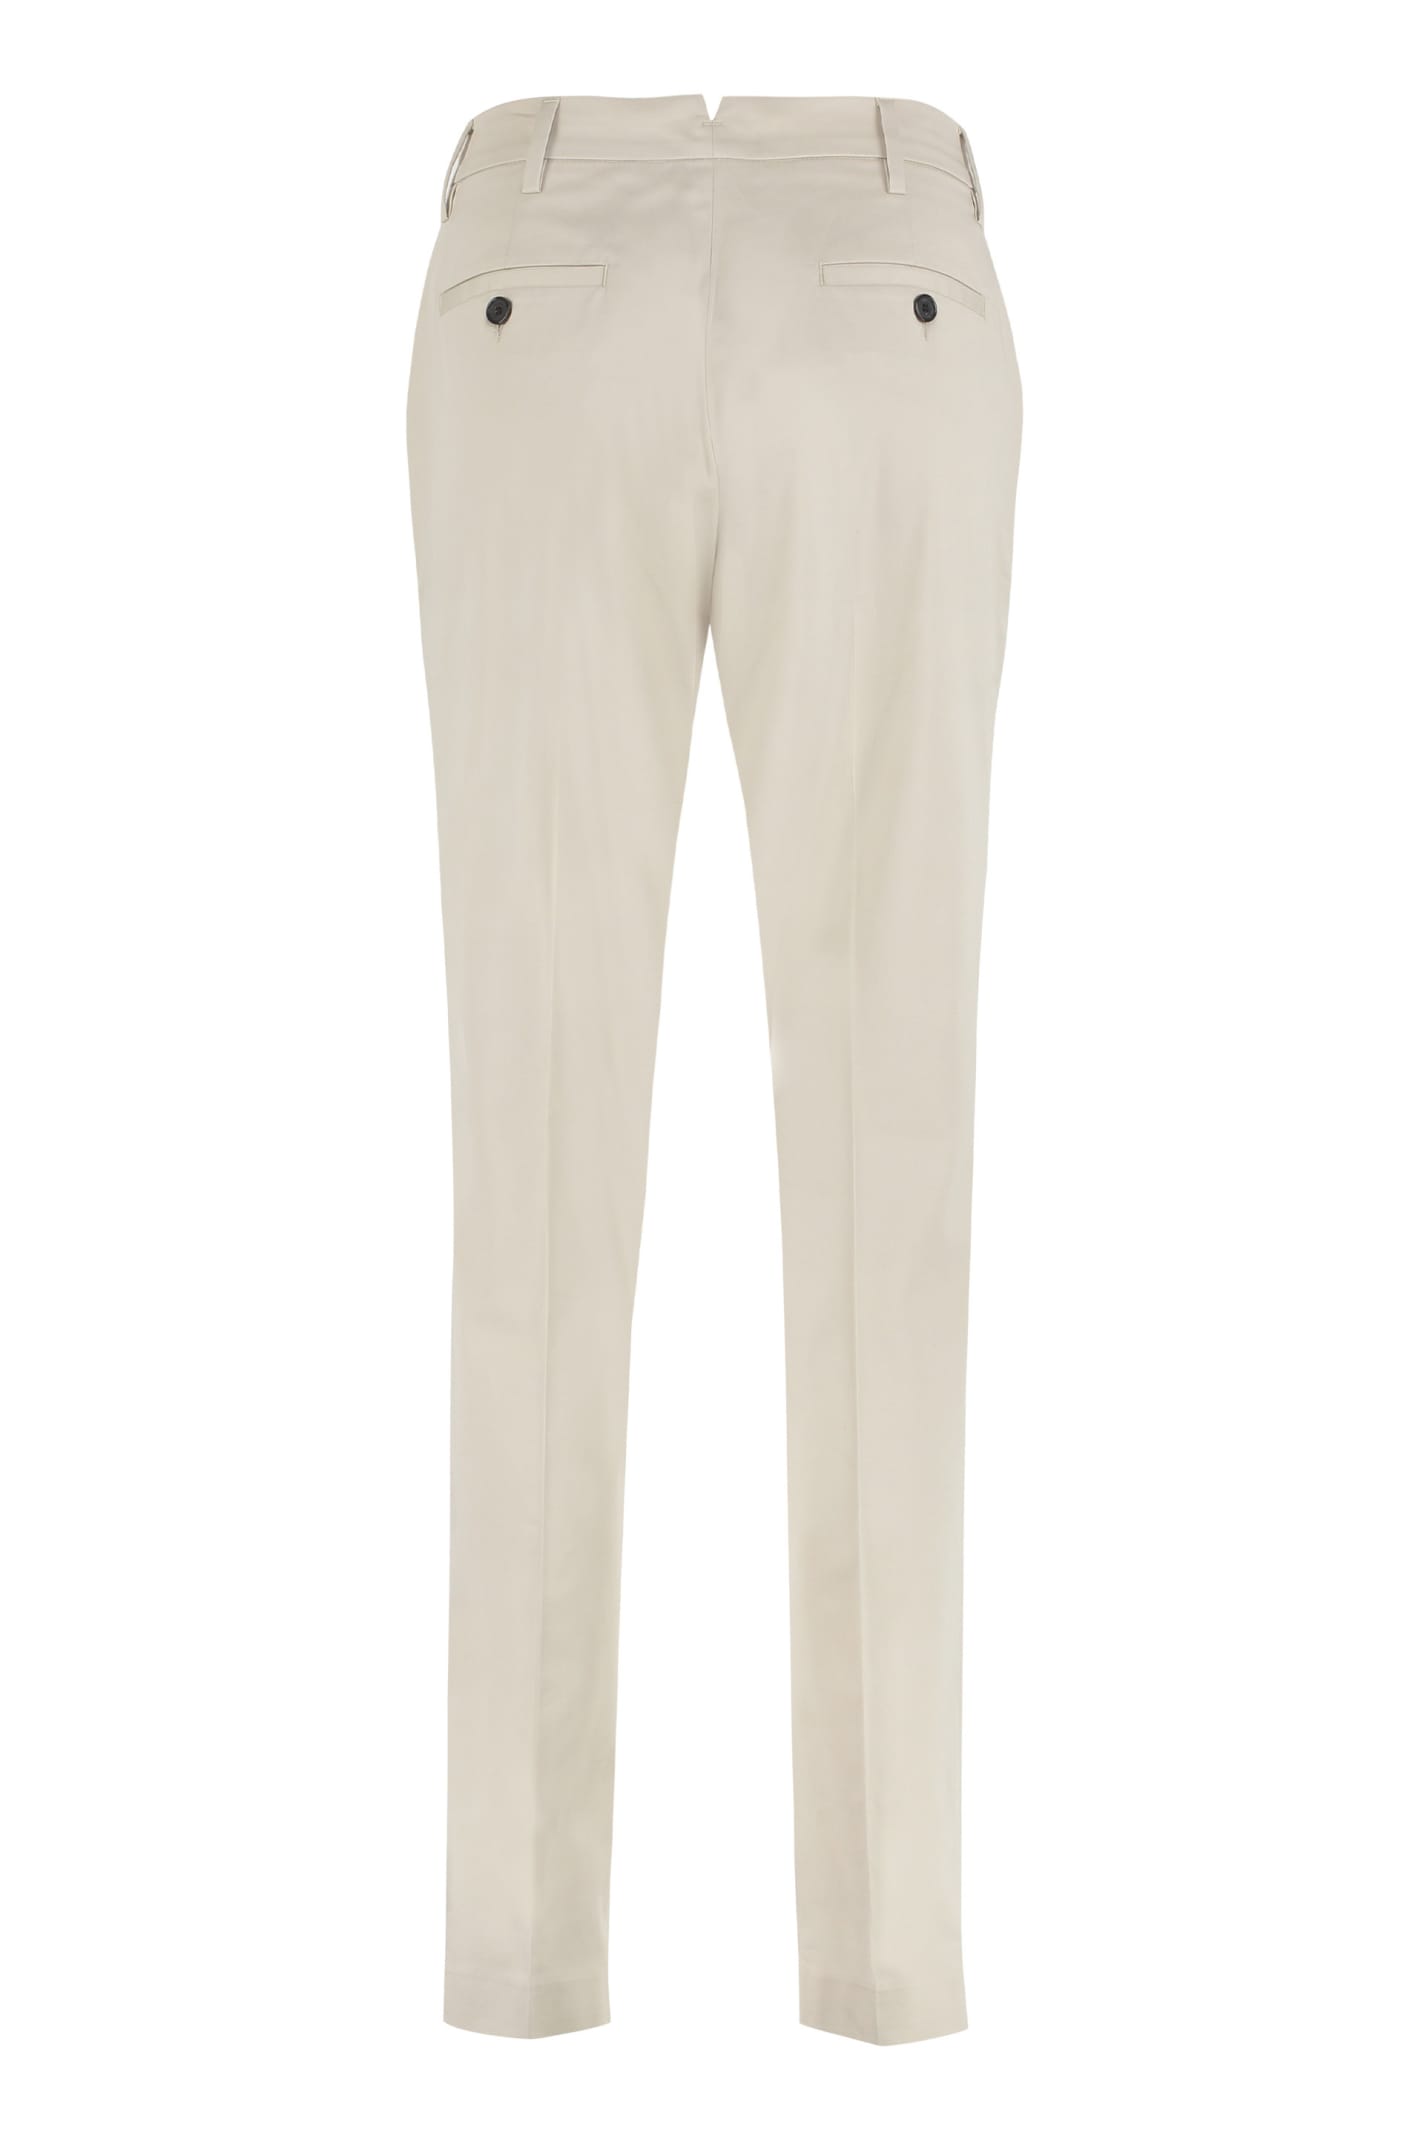 Shop Department Five Stretch Cotton Trousers In Beige